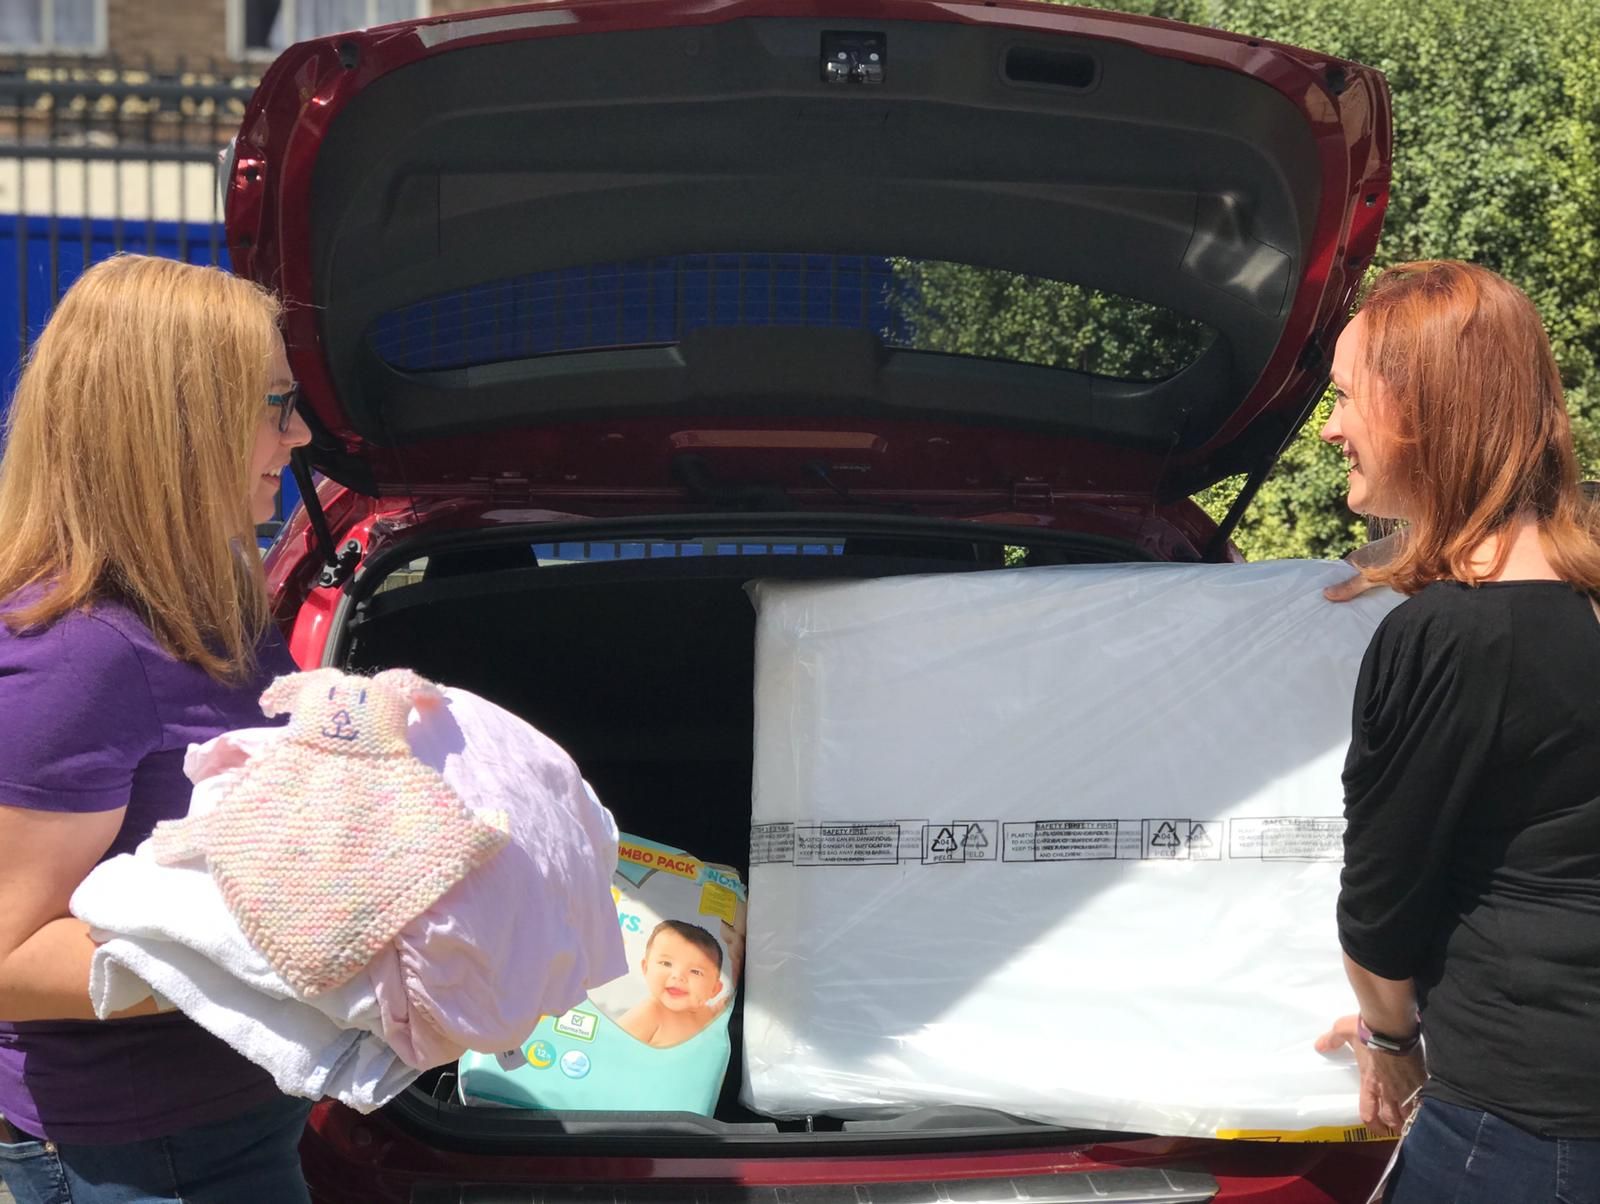 Two women loading gifts into the boot of a car